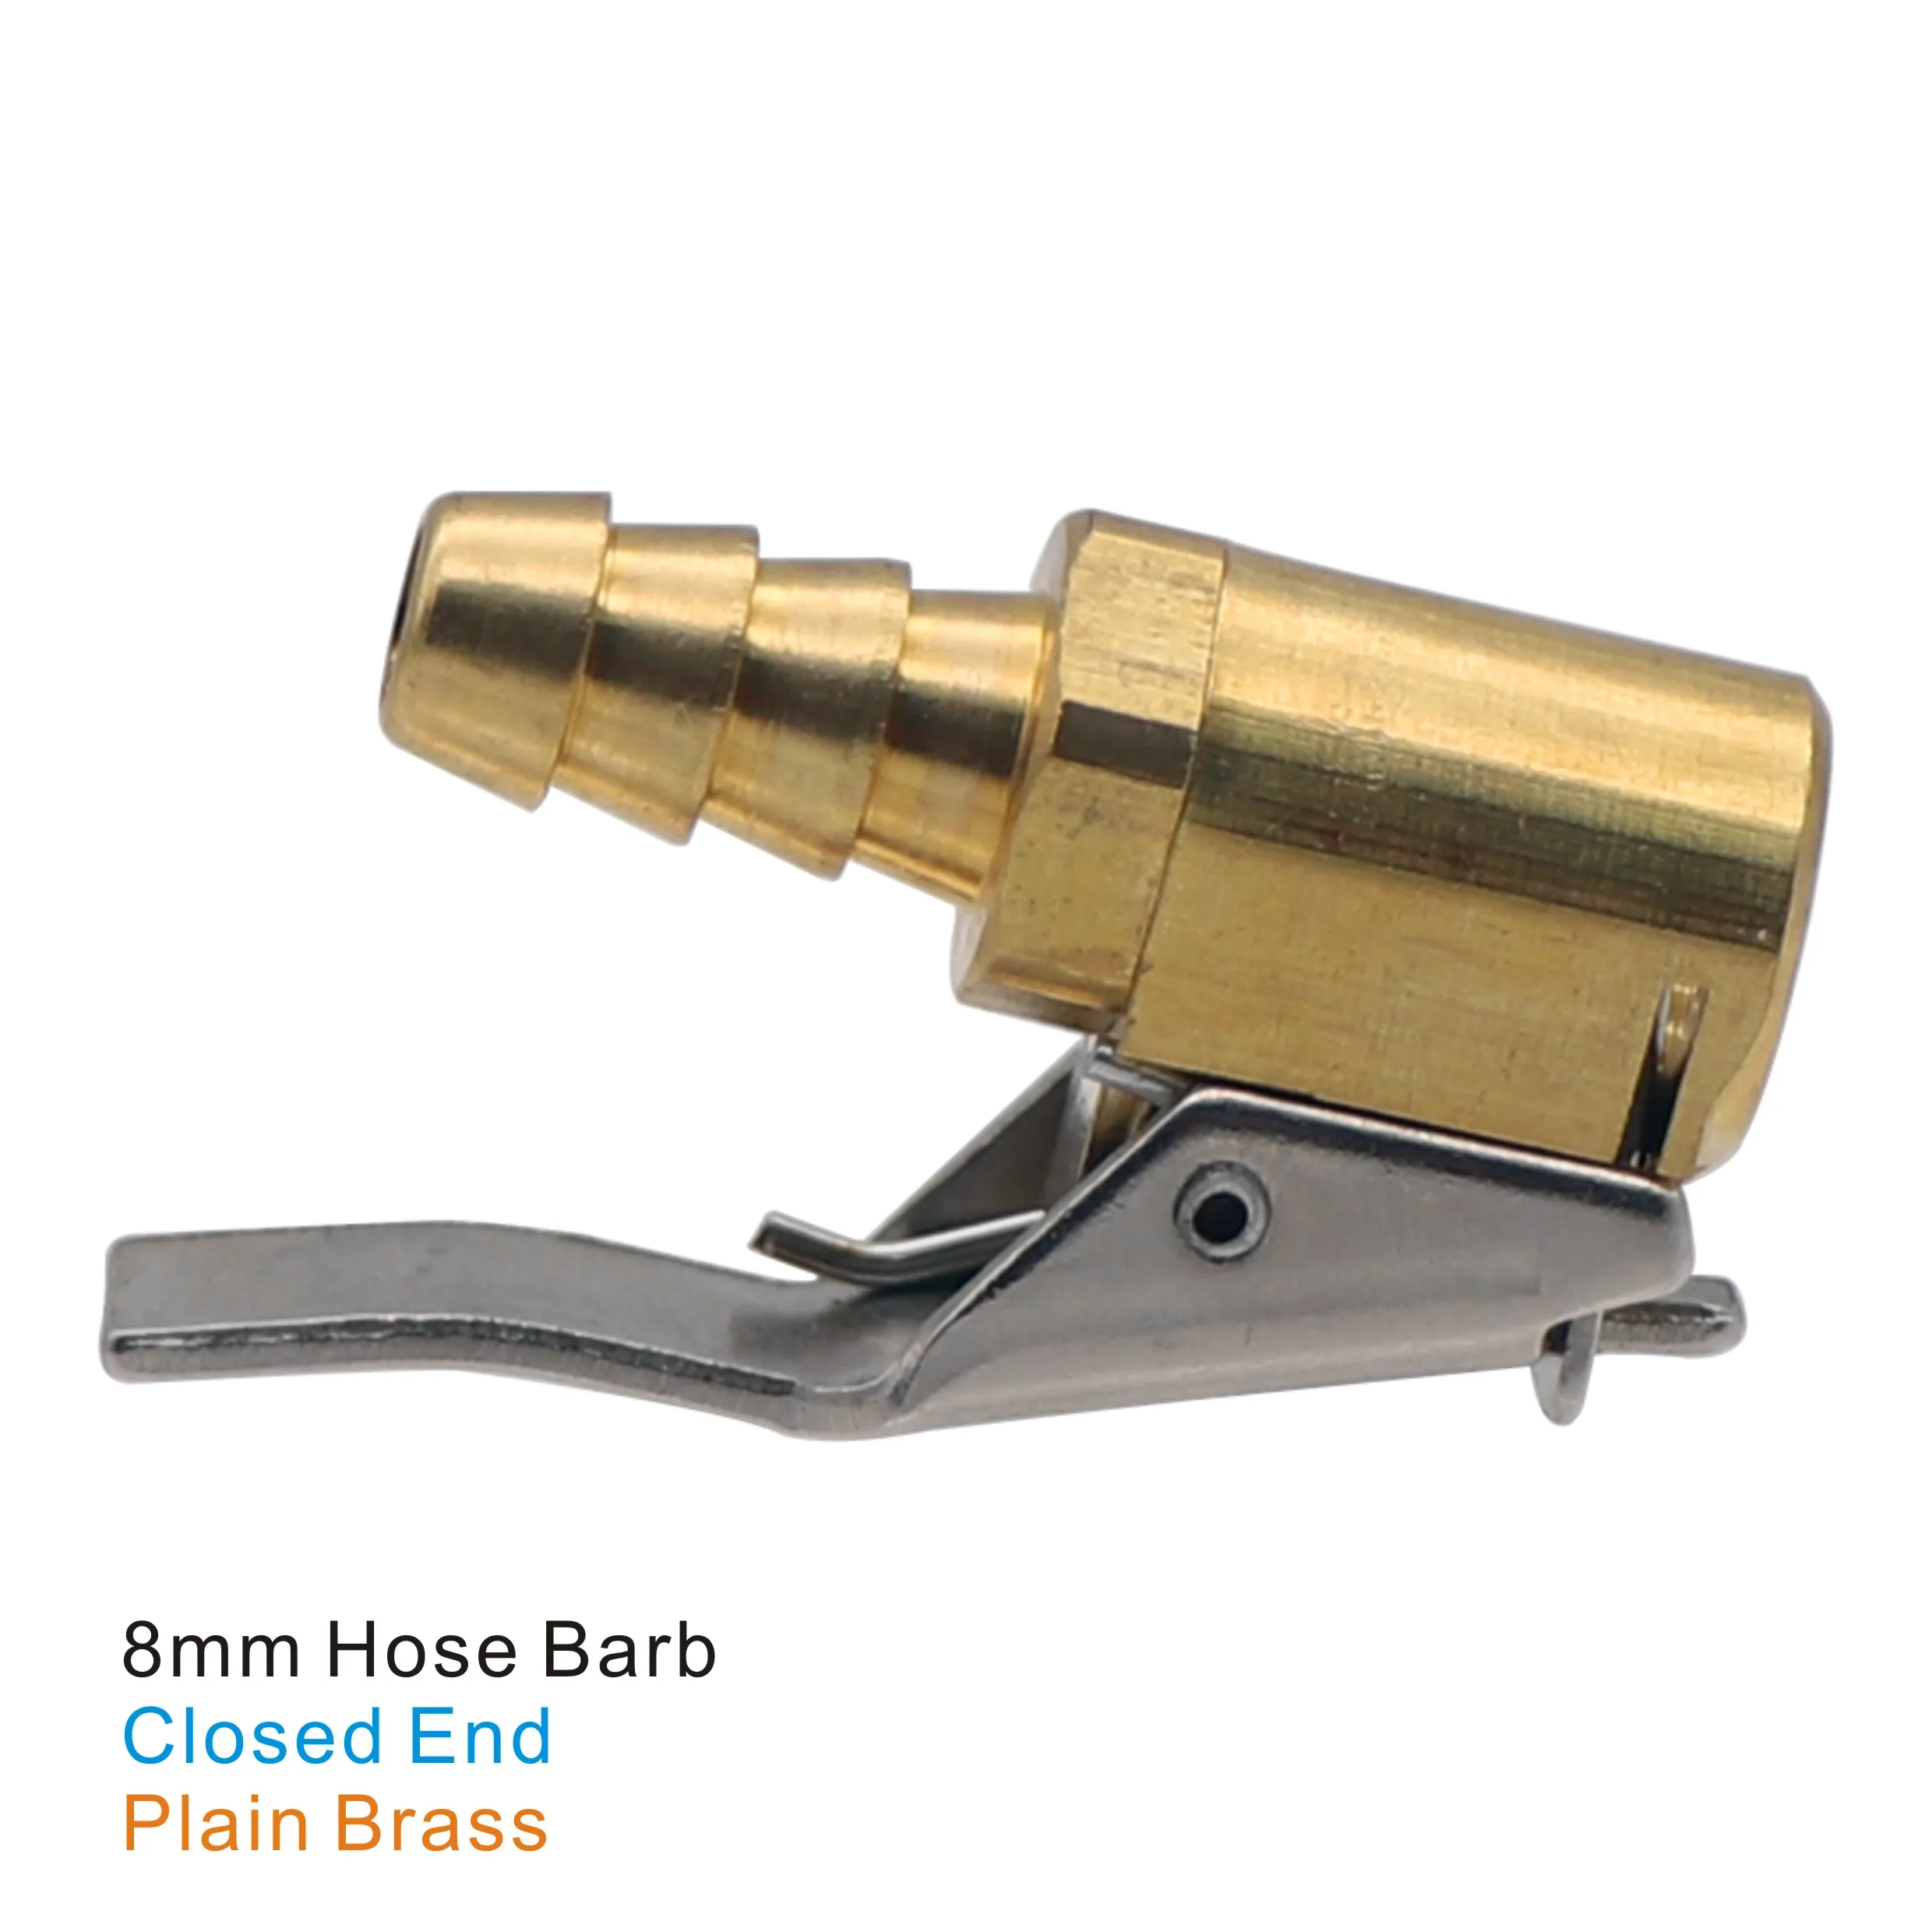 8mm Clip-on Air Chuck Closed End Plain Brass or Nickel Plated 5/16" Hose Barb Professional Tire Inflation Tool 1 pc